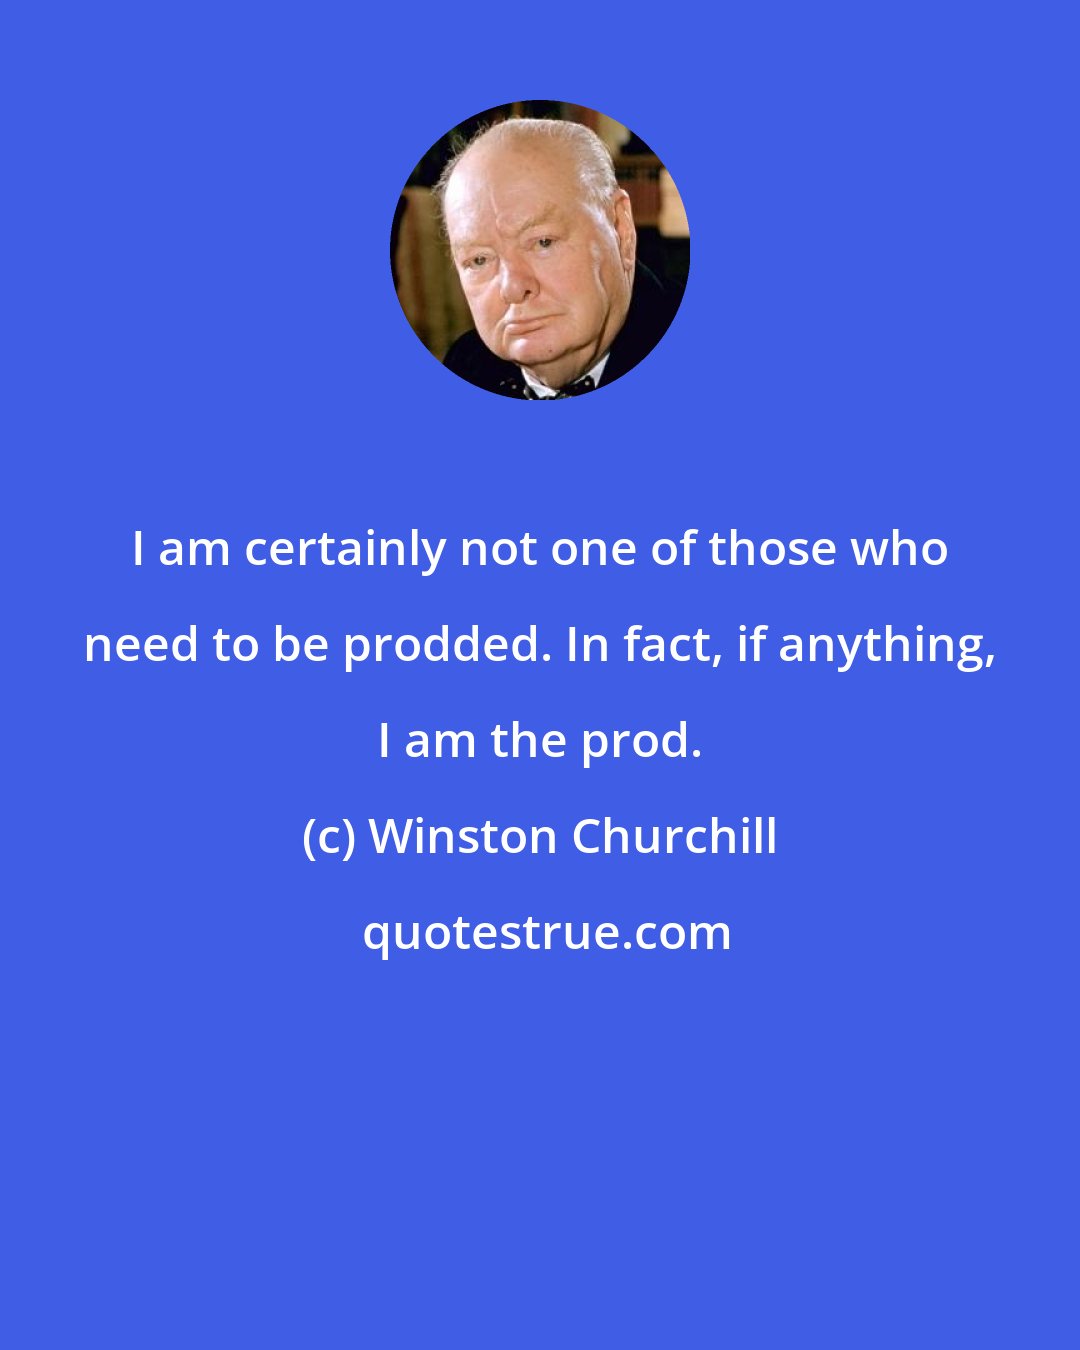 Winston Churchill: I am certainly not one of those who need to be prodded. In fact, if anything, I am the prod.